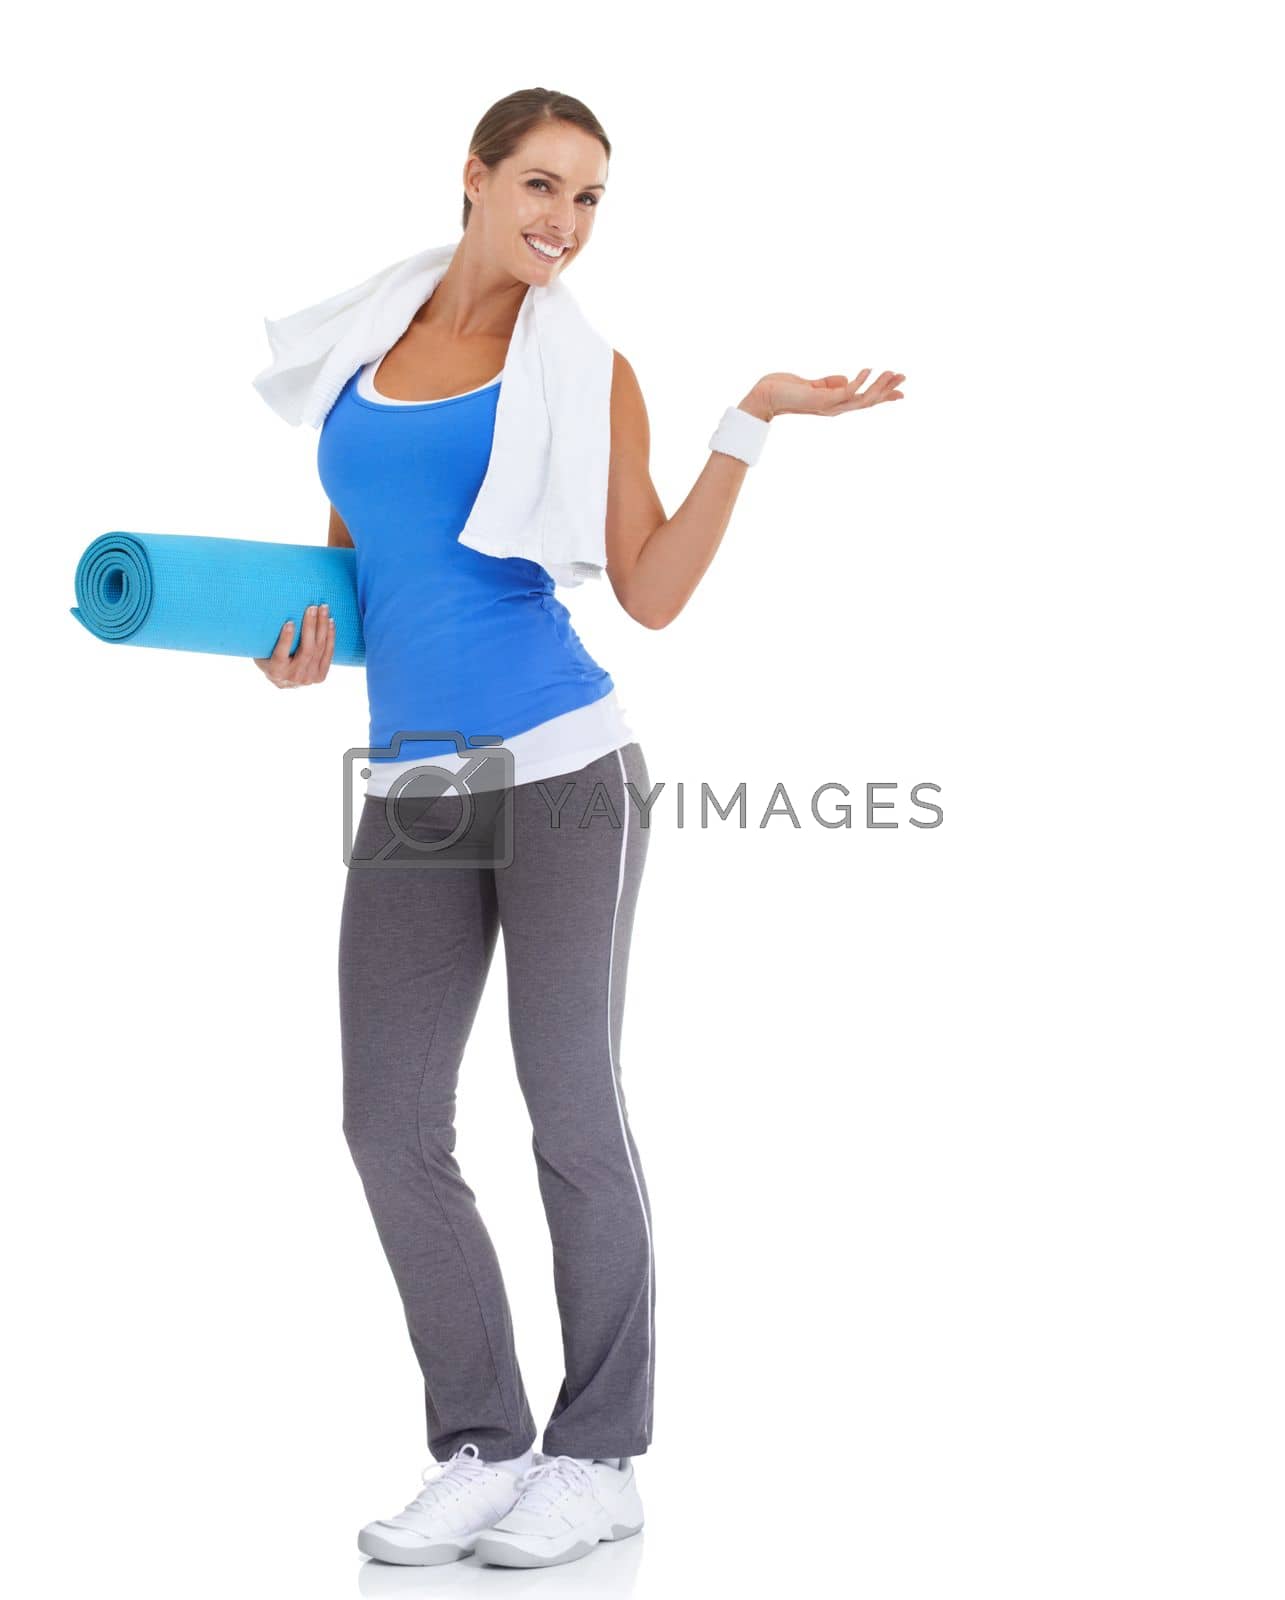 Royalty free image of Heres the answer to your fitness needs...Fit young woman holding a pilates mat with a smile - isolated on white. by YuriArcurs